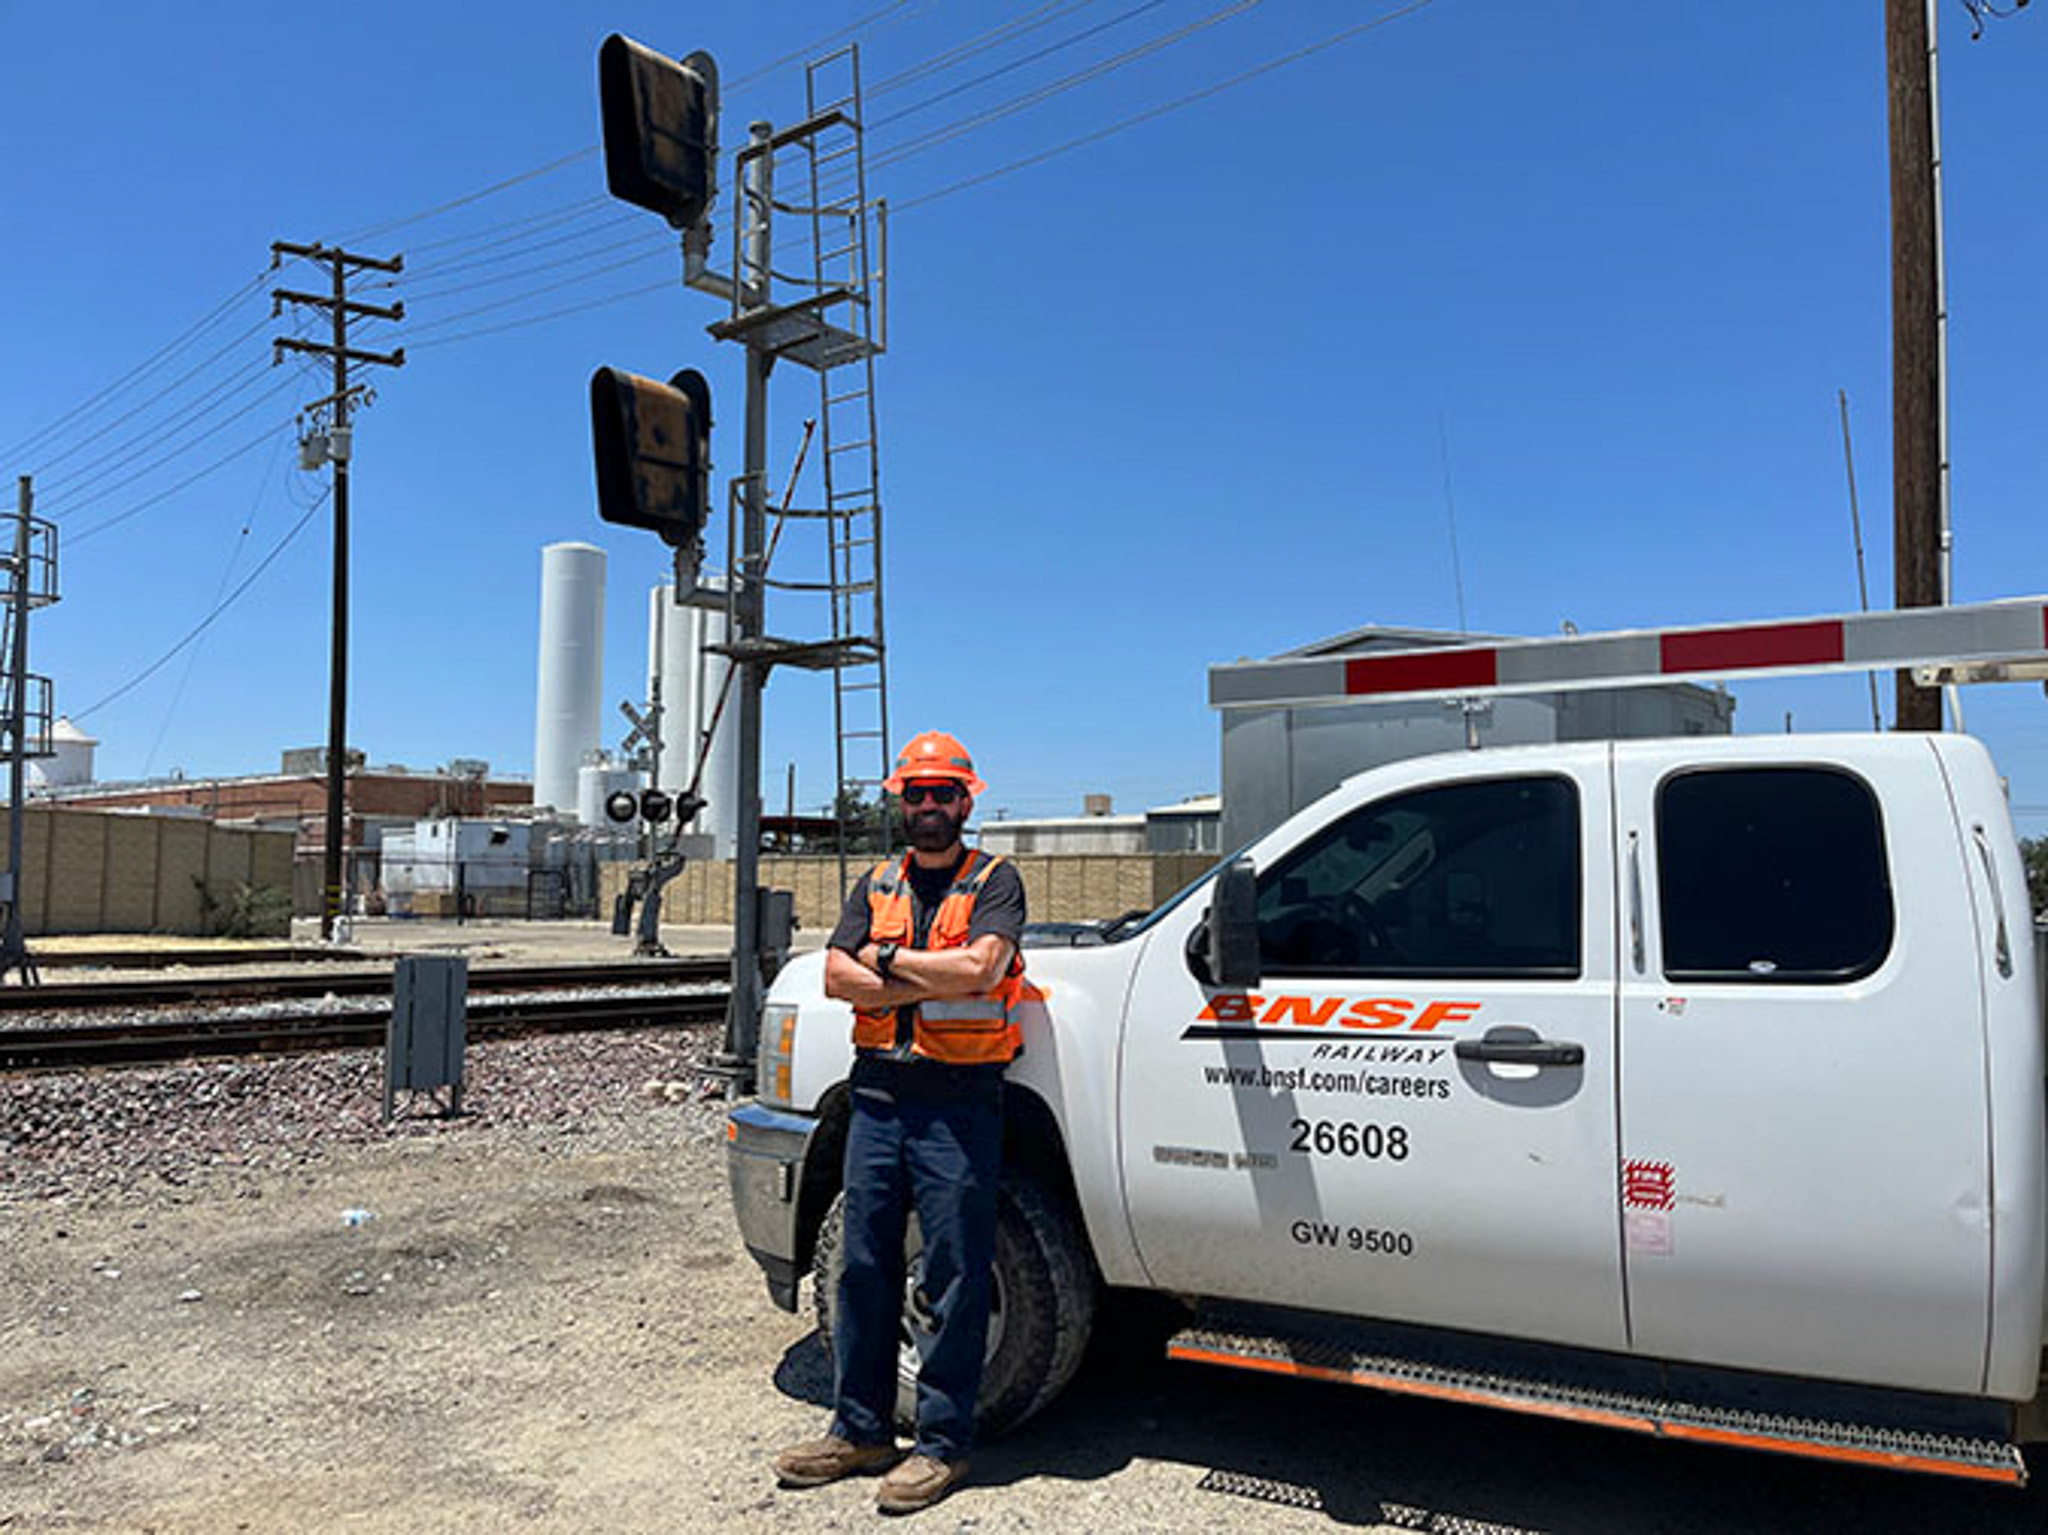 Chavez in front of a BNSF truck with train signals in the background